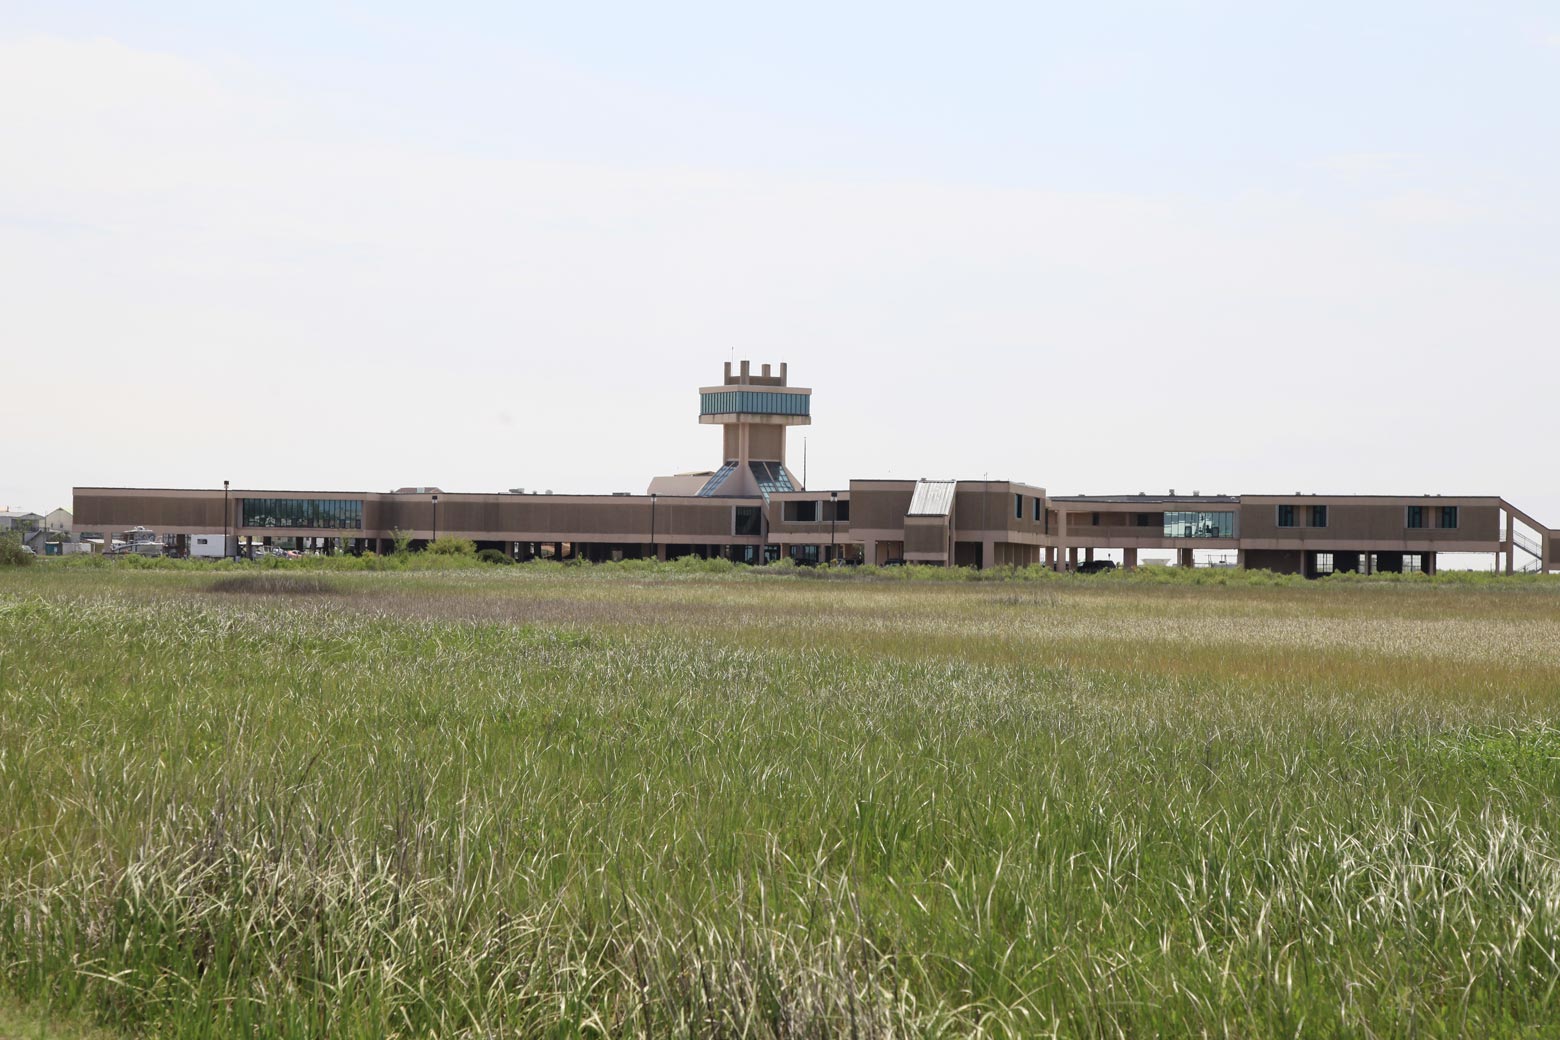 A field of grass in the foreground with a large brown building in the background. The building is one story, but raised on stilts. In the center is a lookout tower.